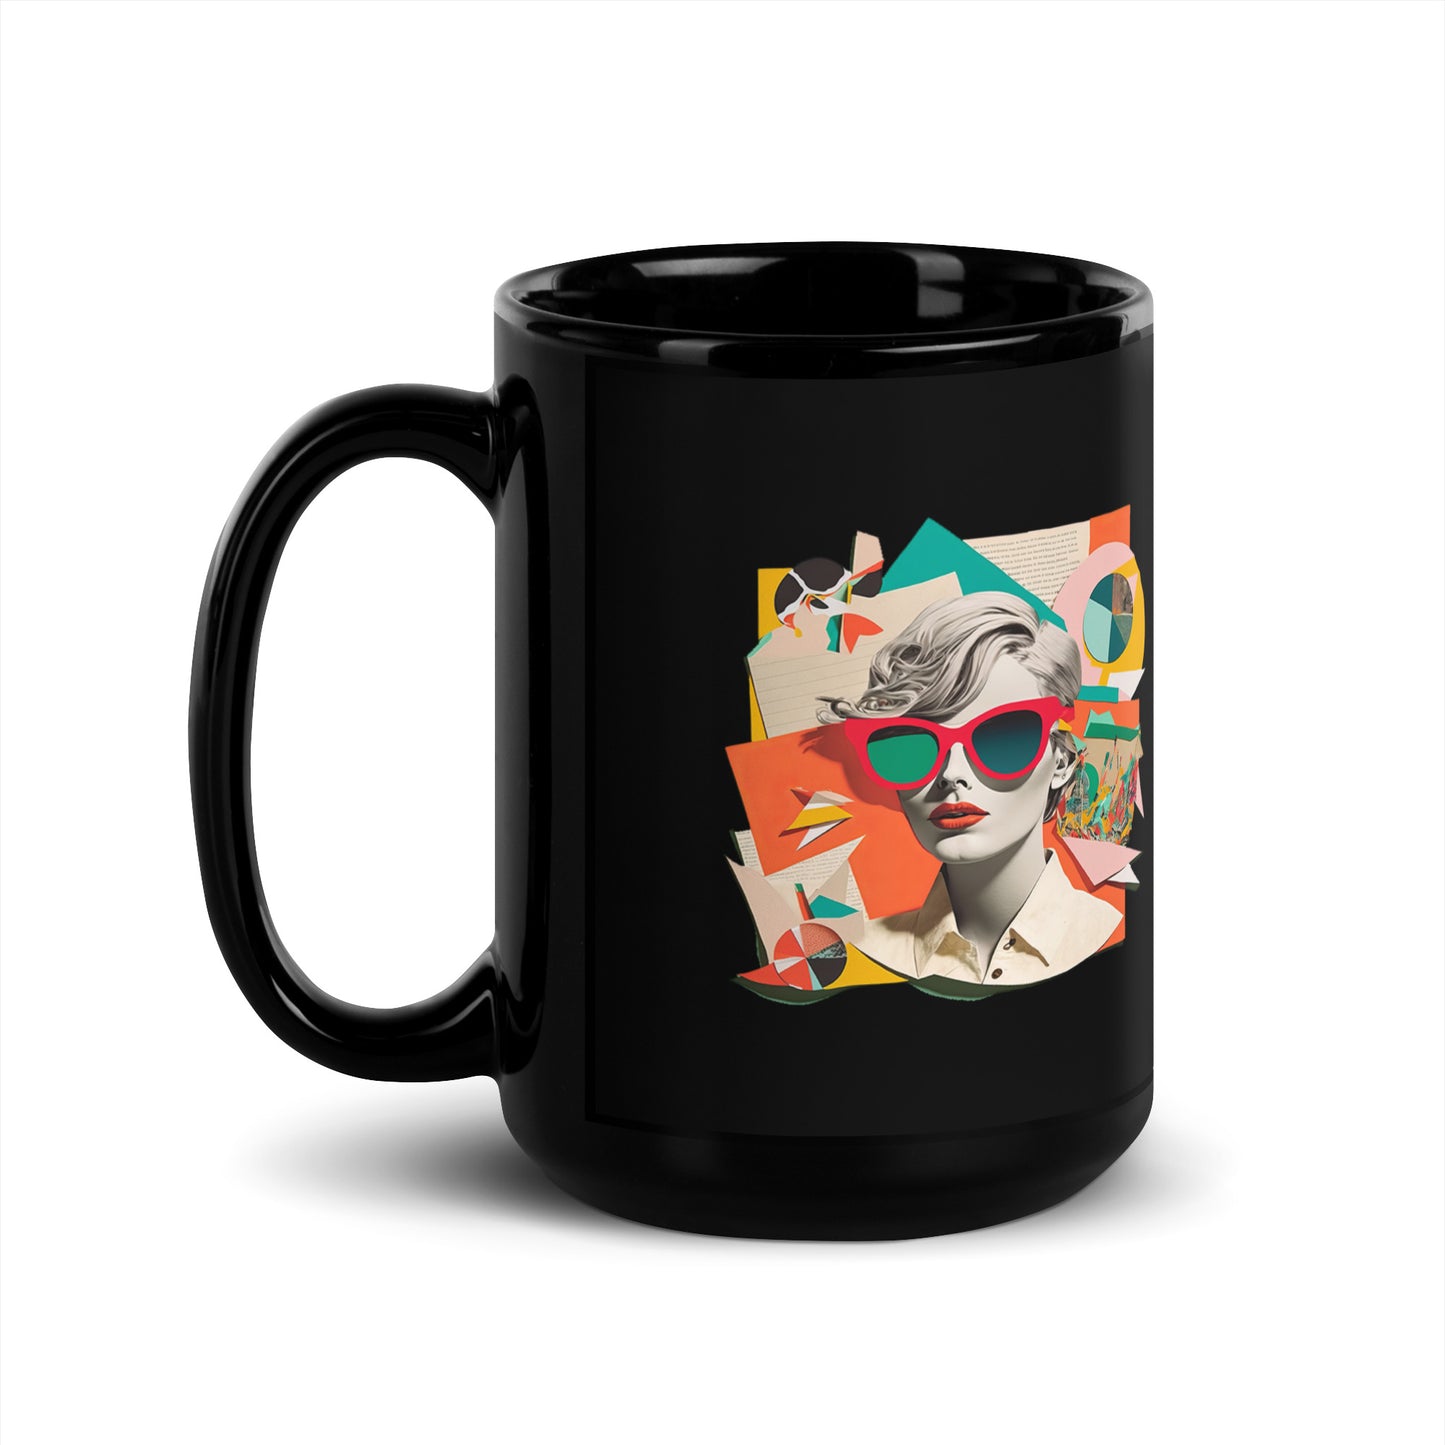 Life is better with Artrendy - Black Glossy Mug